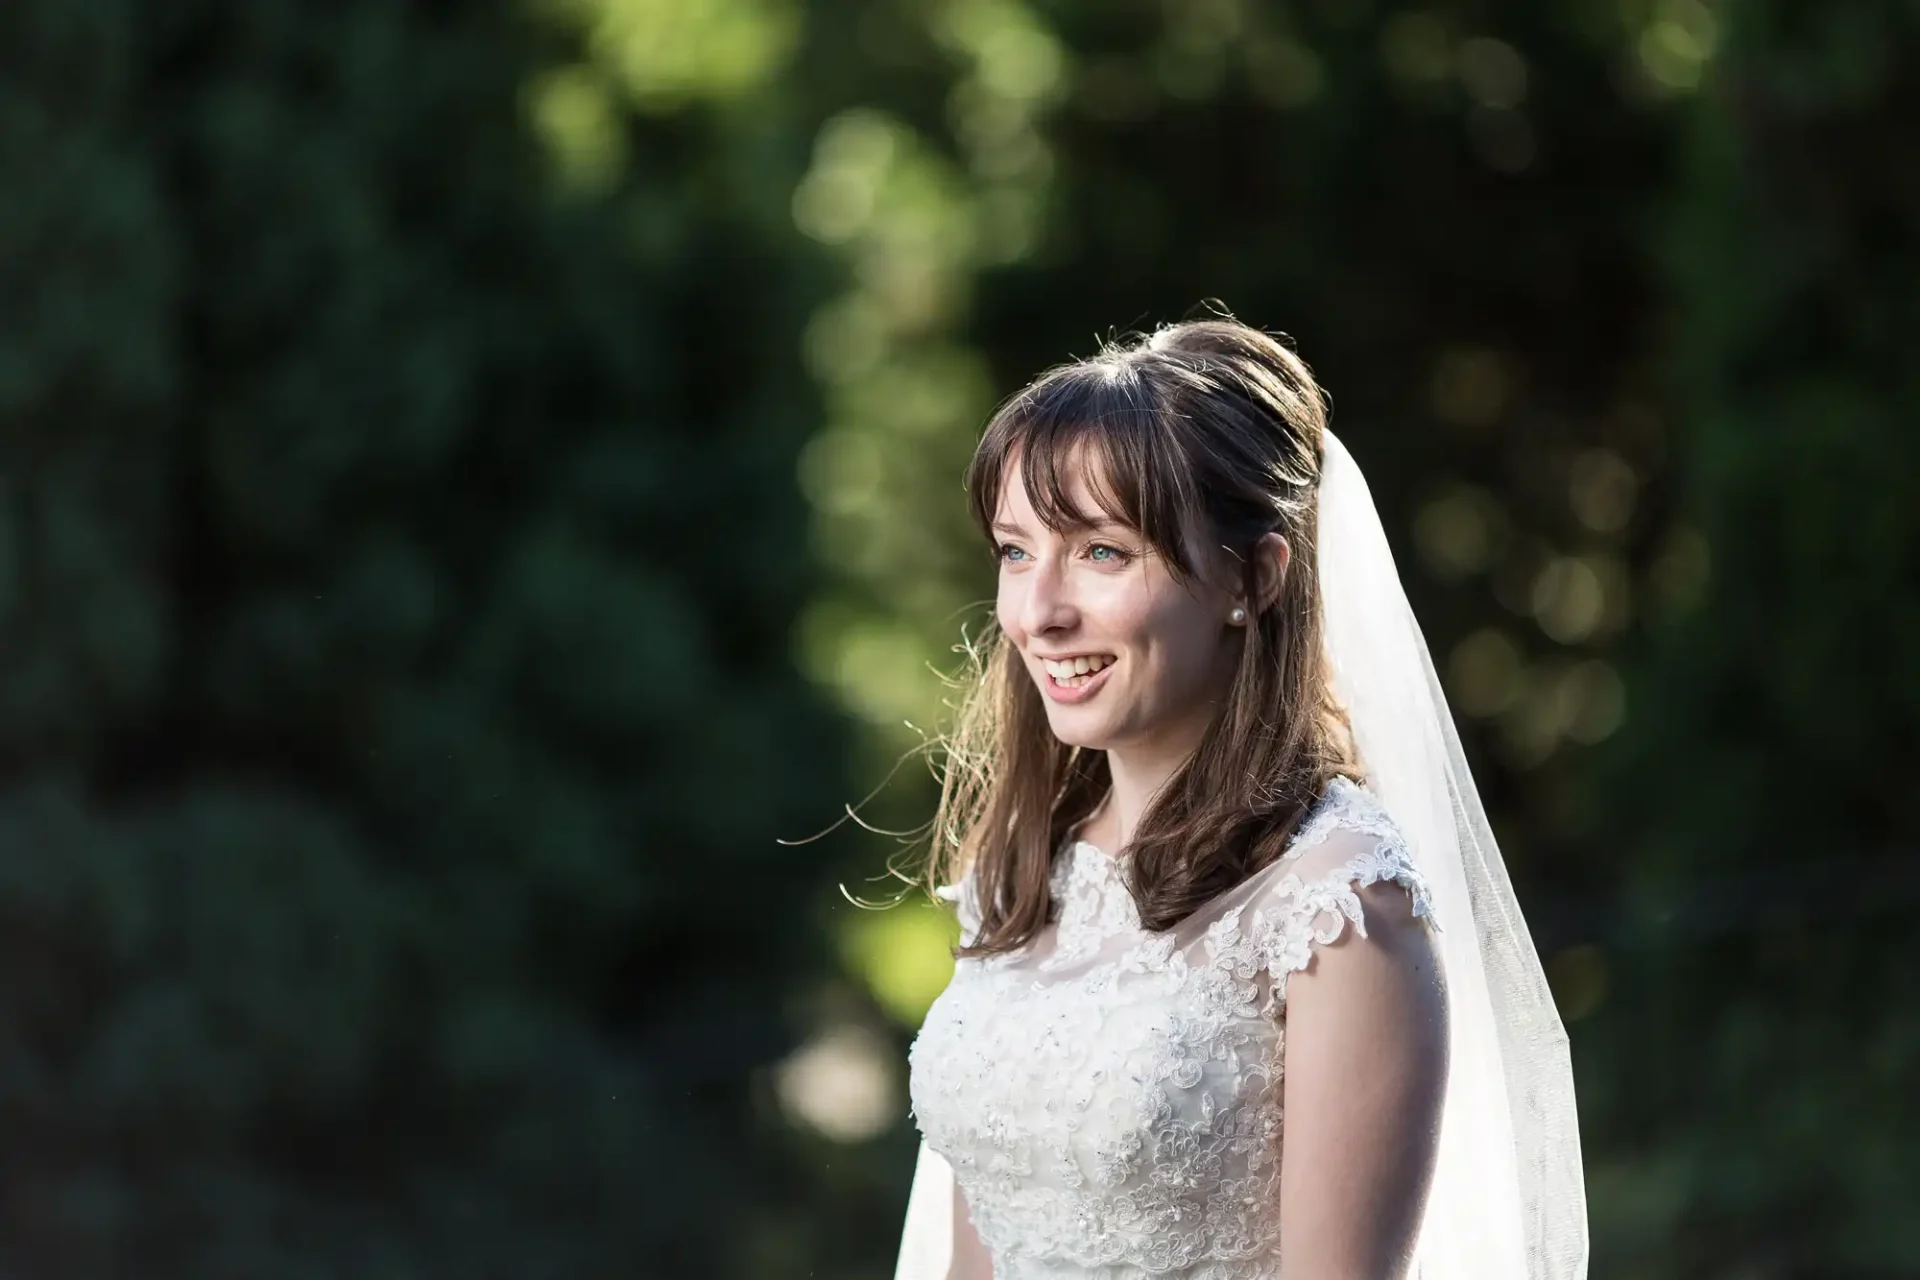 A smiling bride in a lace gown and veil, backlit by sunlight, with a blurred greenery background.